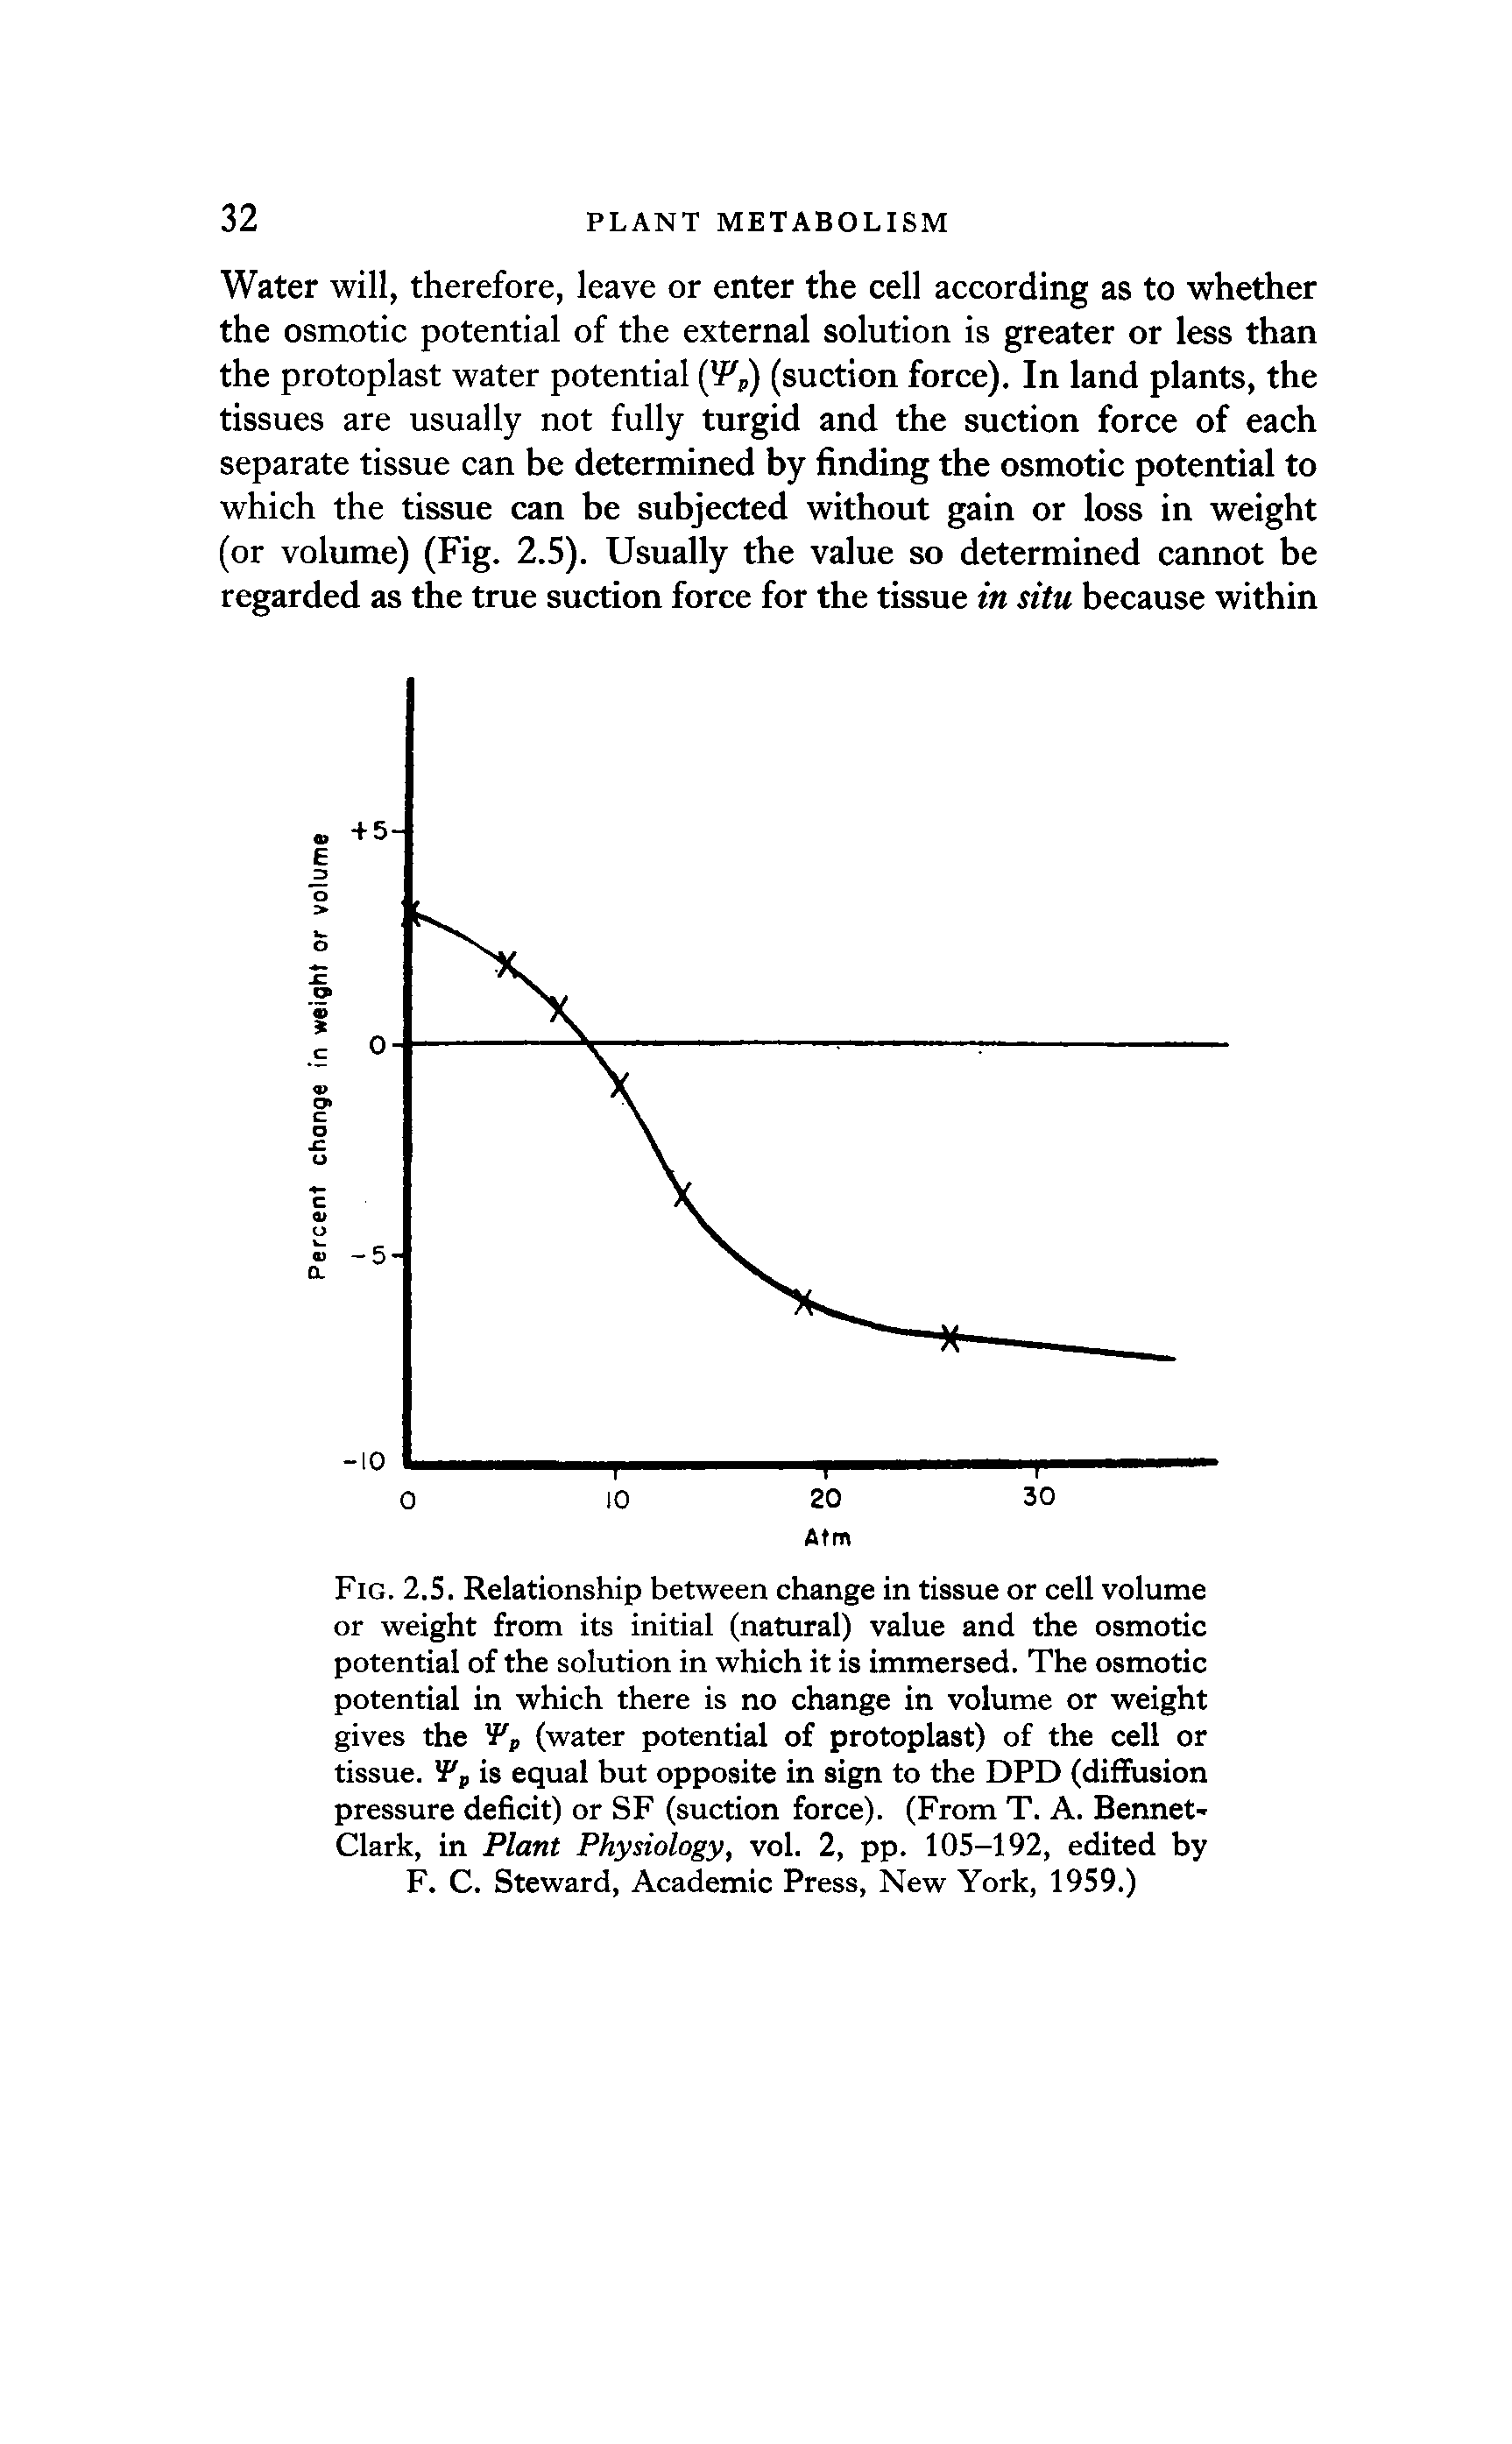 Fig. 2.S. Relationship between change in tissue or cell volume or weight from its initial (natural) value and the osmotic potential of the solution in which it is immersed. The osmotic potential in which there is no change in volume or weight gives the (water potential of protoplast) of the cell or tissue. Pp is equal but opposite in sign to the DPD (diffusion pressure deficit) or SF (suction force). (From T. A. Rennet-Clark, in Plant Physiology, vol. 2, pp. 105-192, edited by F. C. Steward, Academic Press, New York, 1959.)...